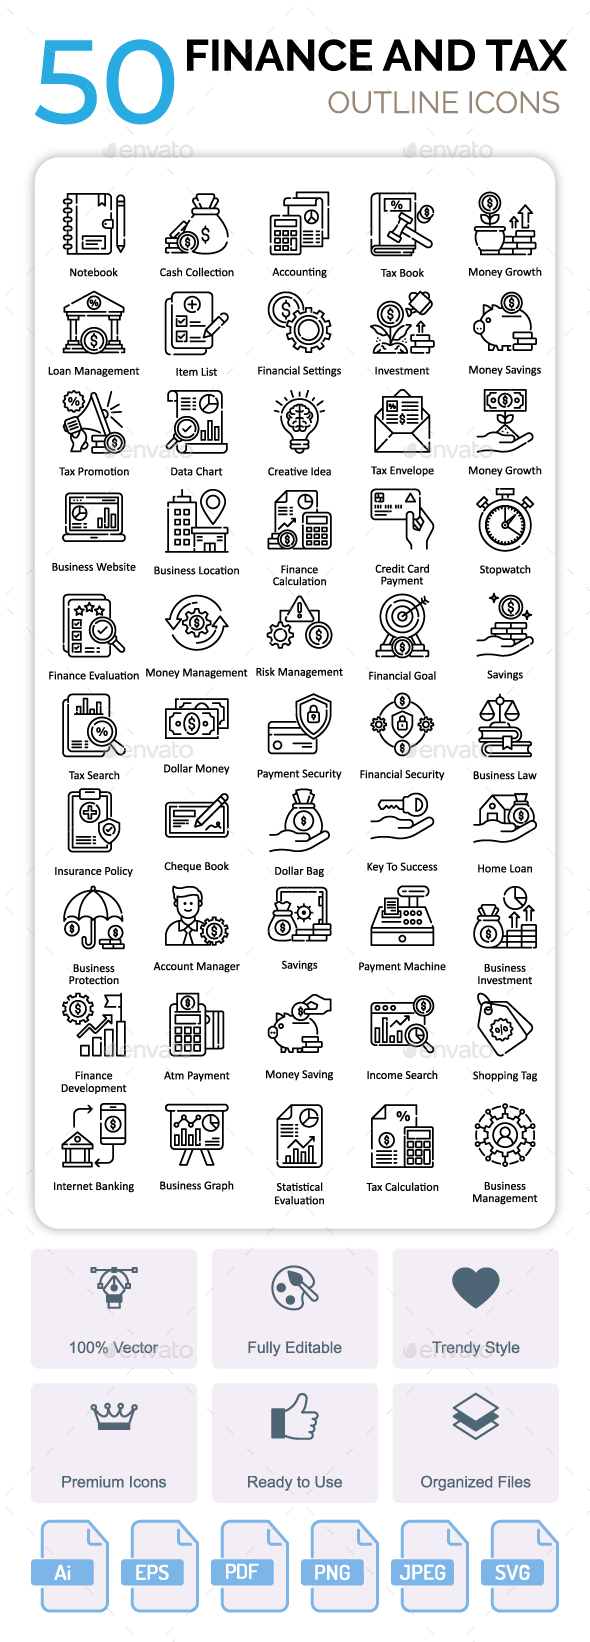 Finance and Tax Outline Icons